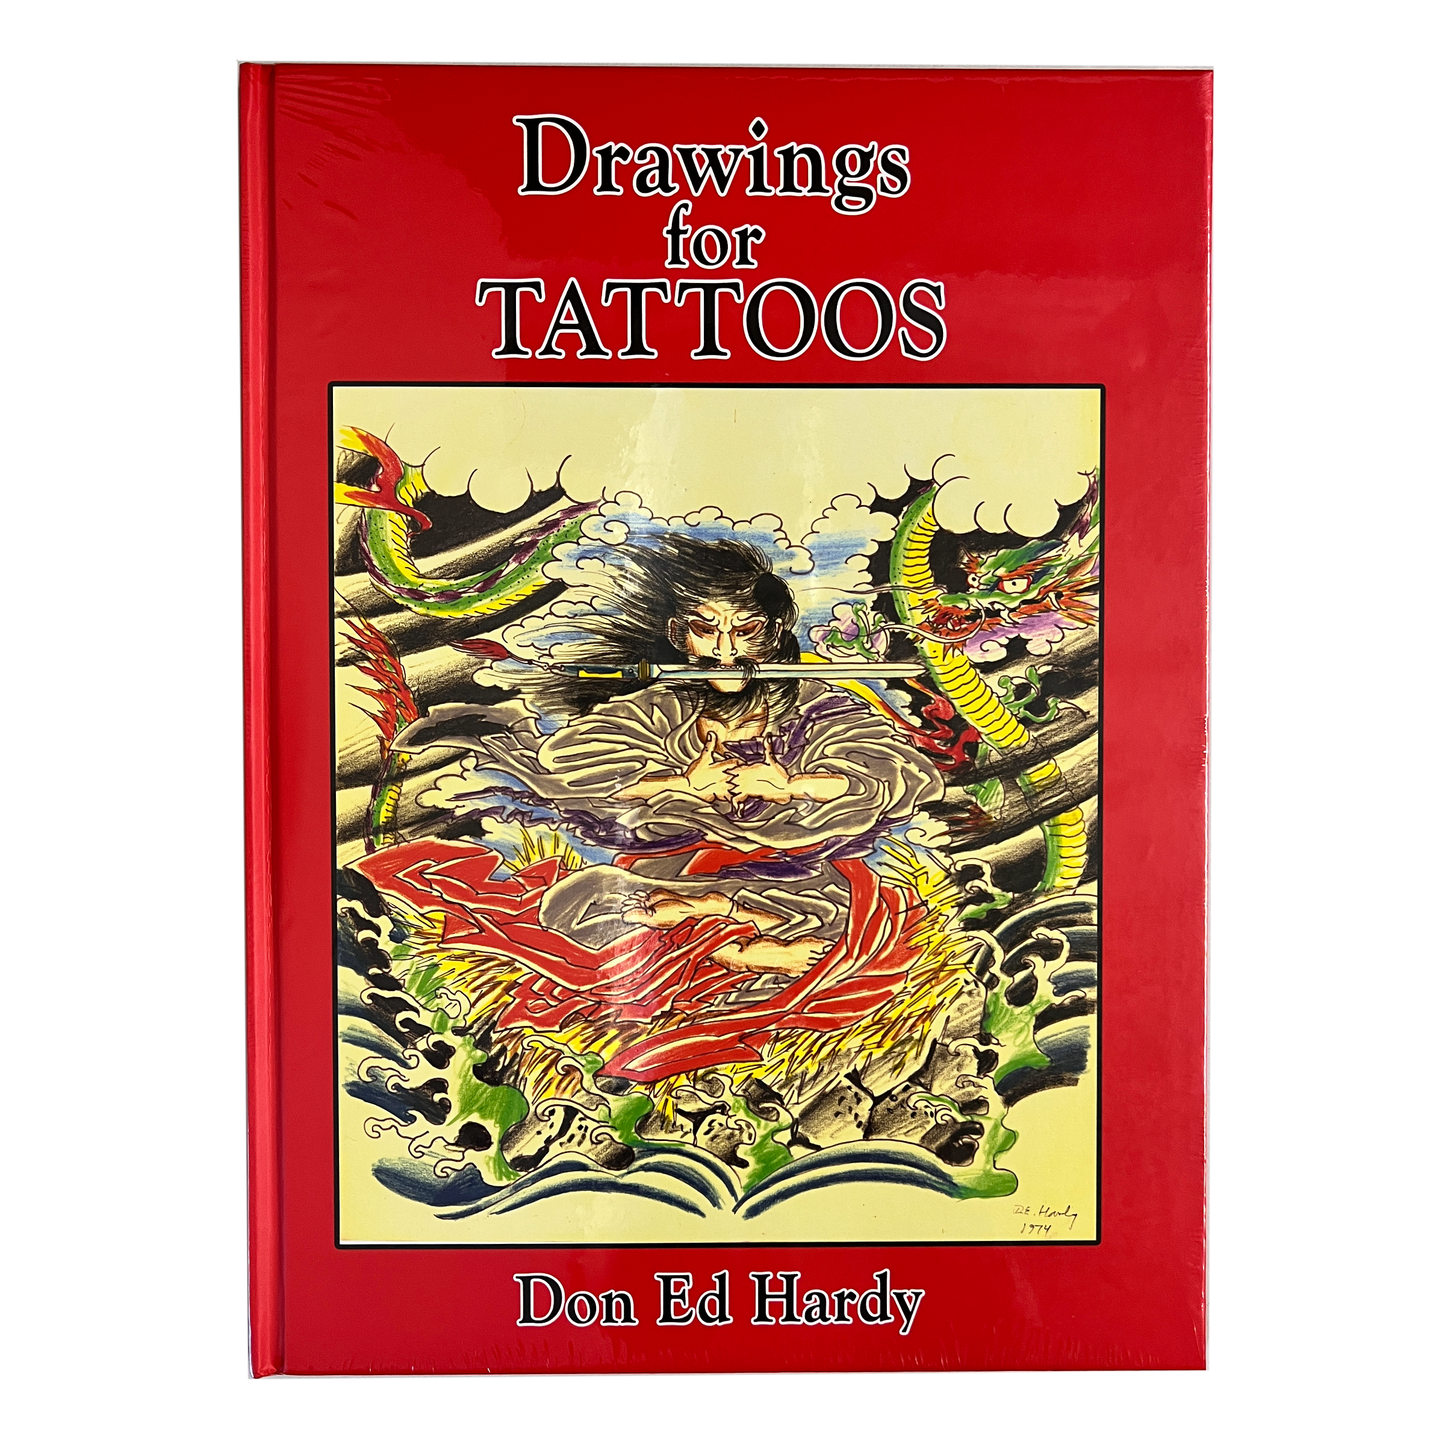 Drawings for Tattoos Vol 1